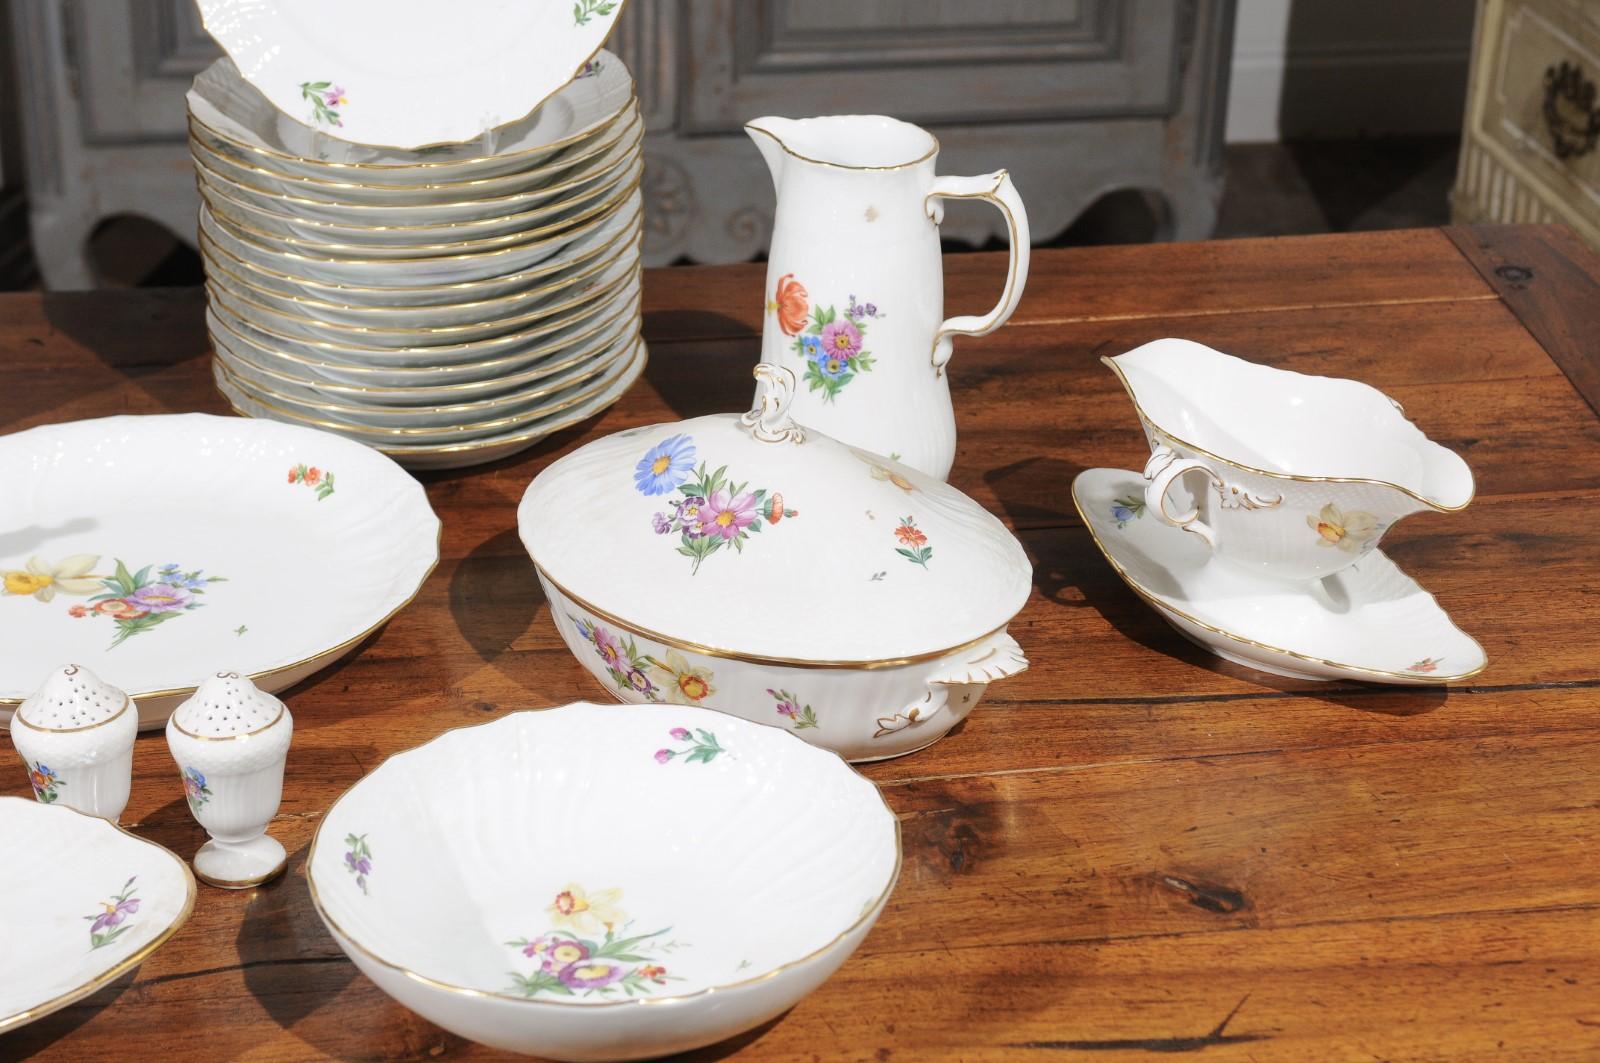 Stamped Royal Copenhagen China Set with Hand Painted Floral Décor and Gilt Trim 2